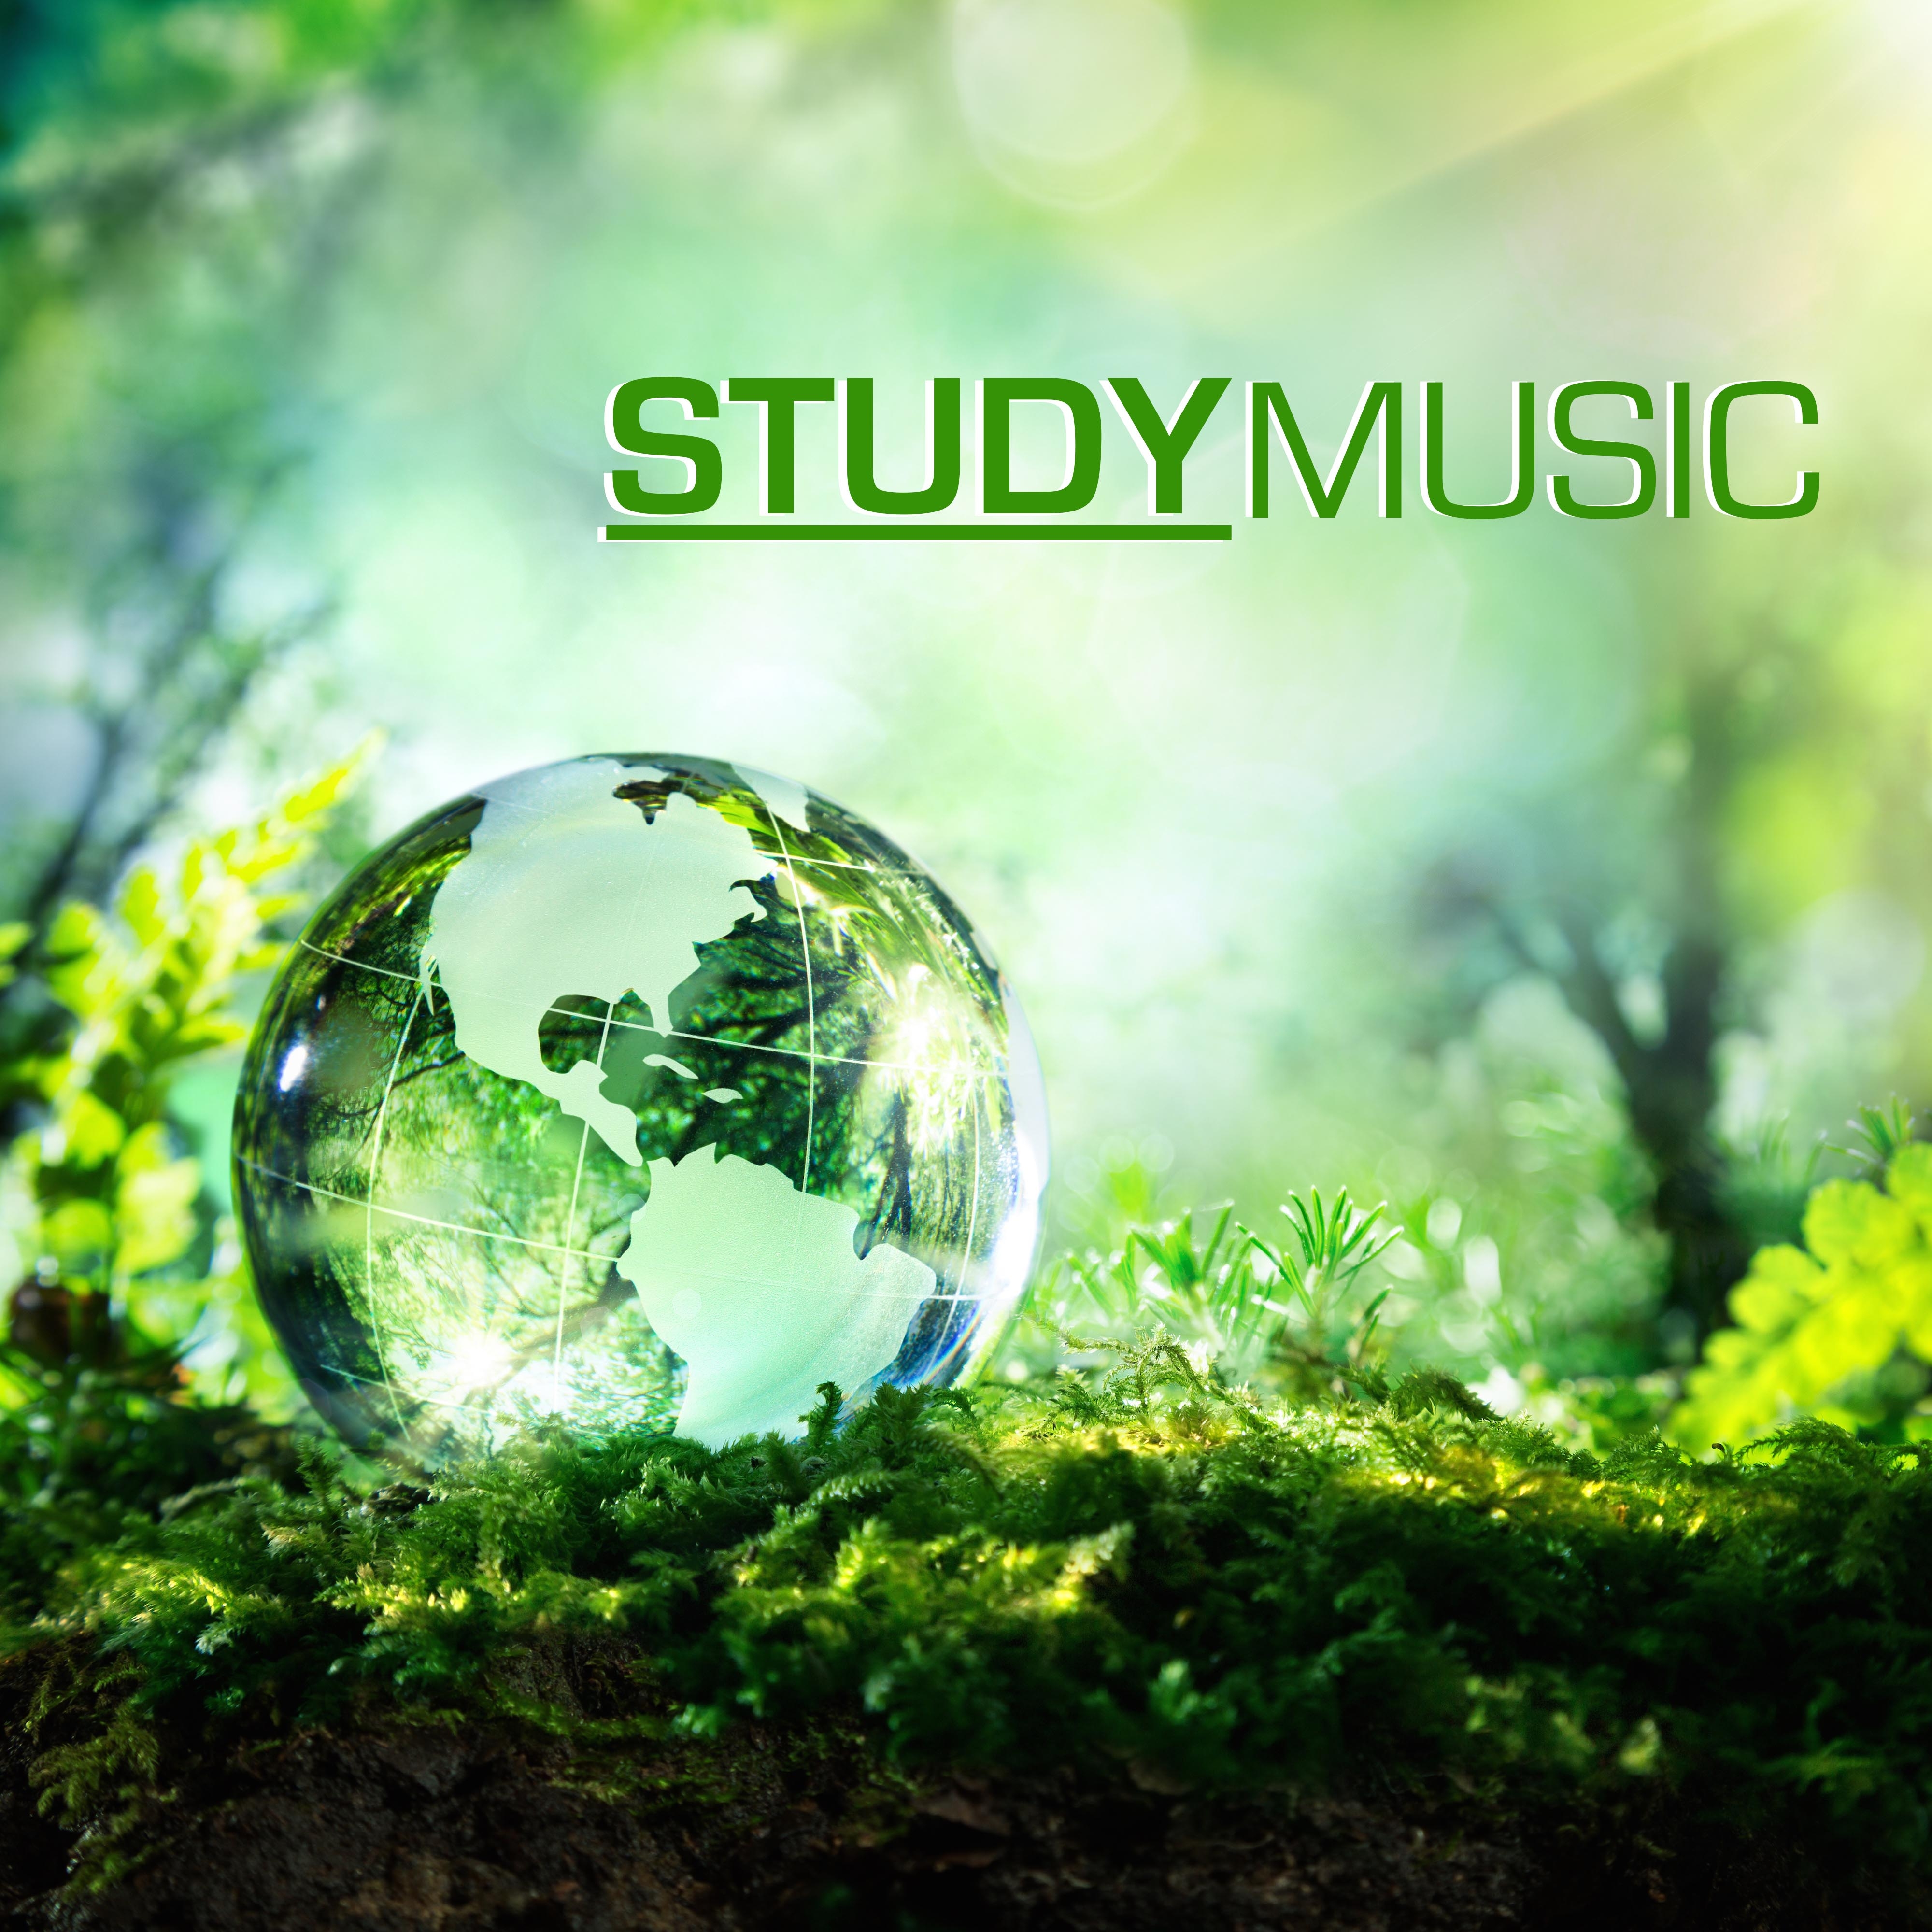 Study Music - Studying Music & Concentration Music for School and University Exam Study, Brain Stimulation, Improve Memory and Concentration